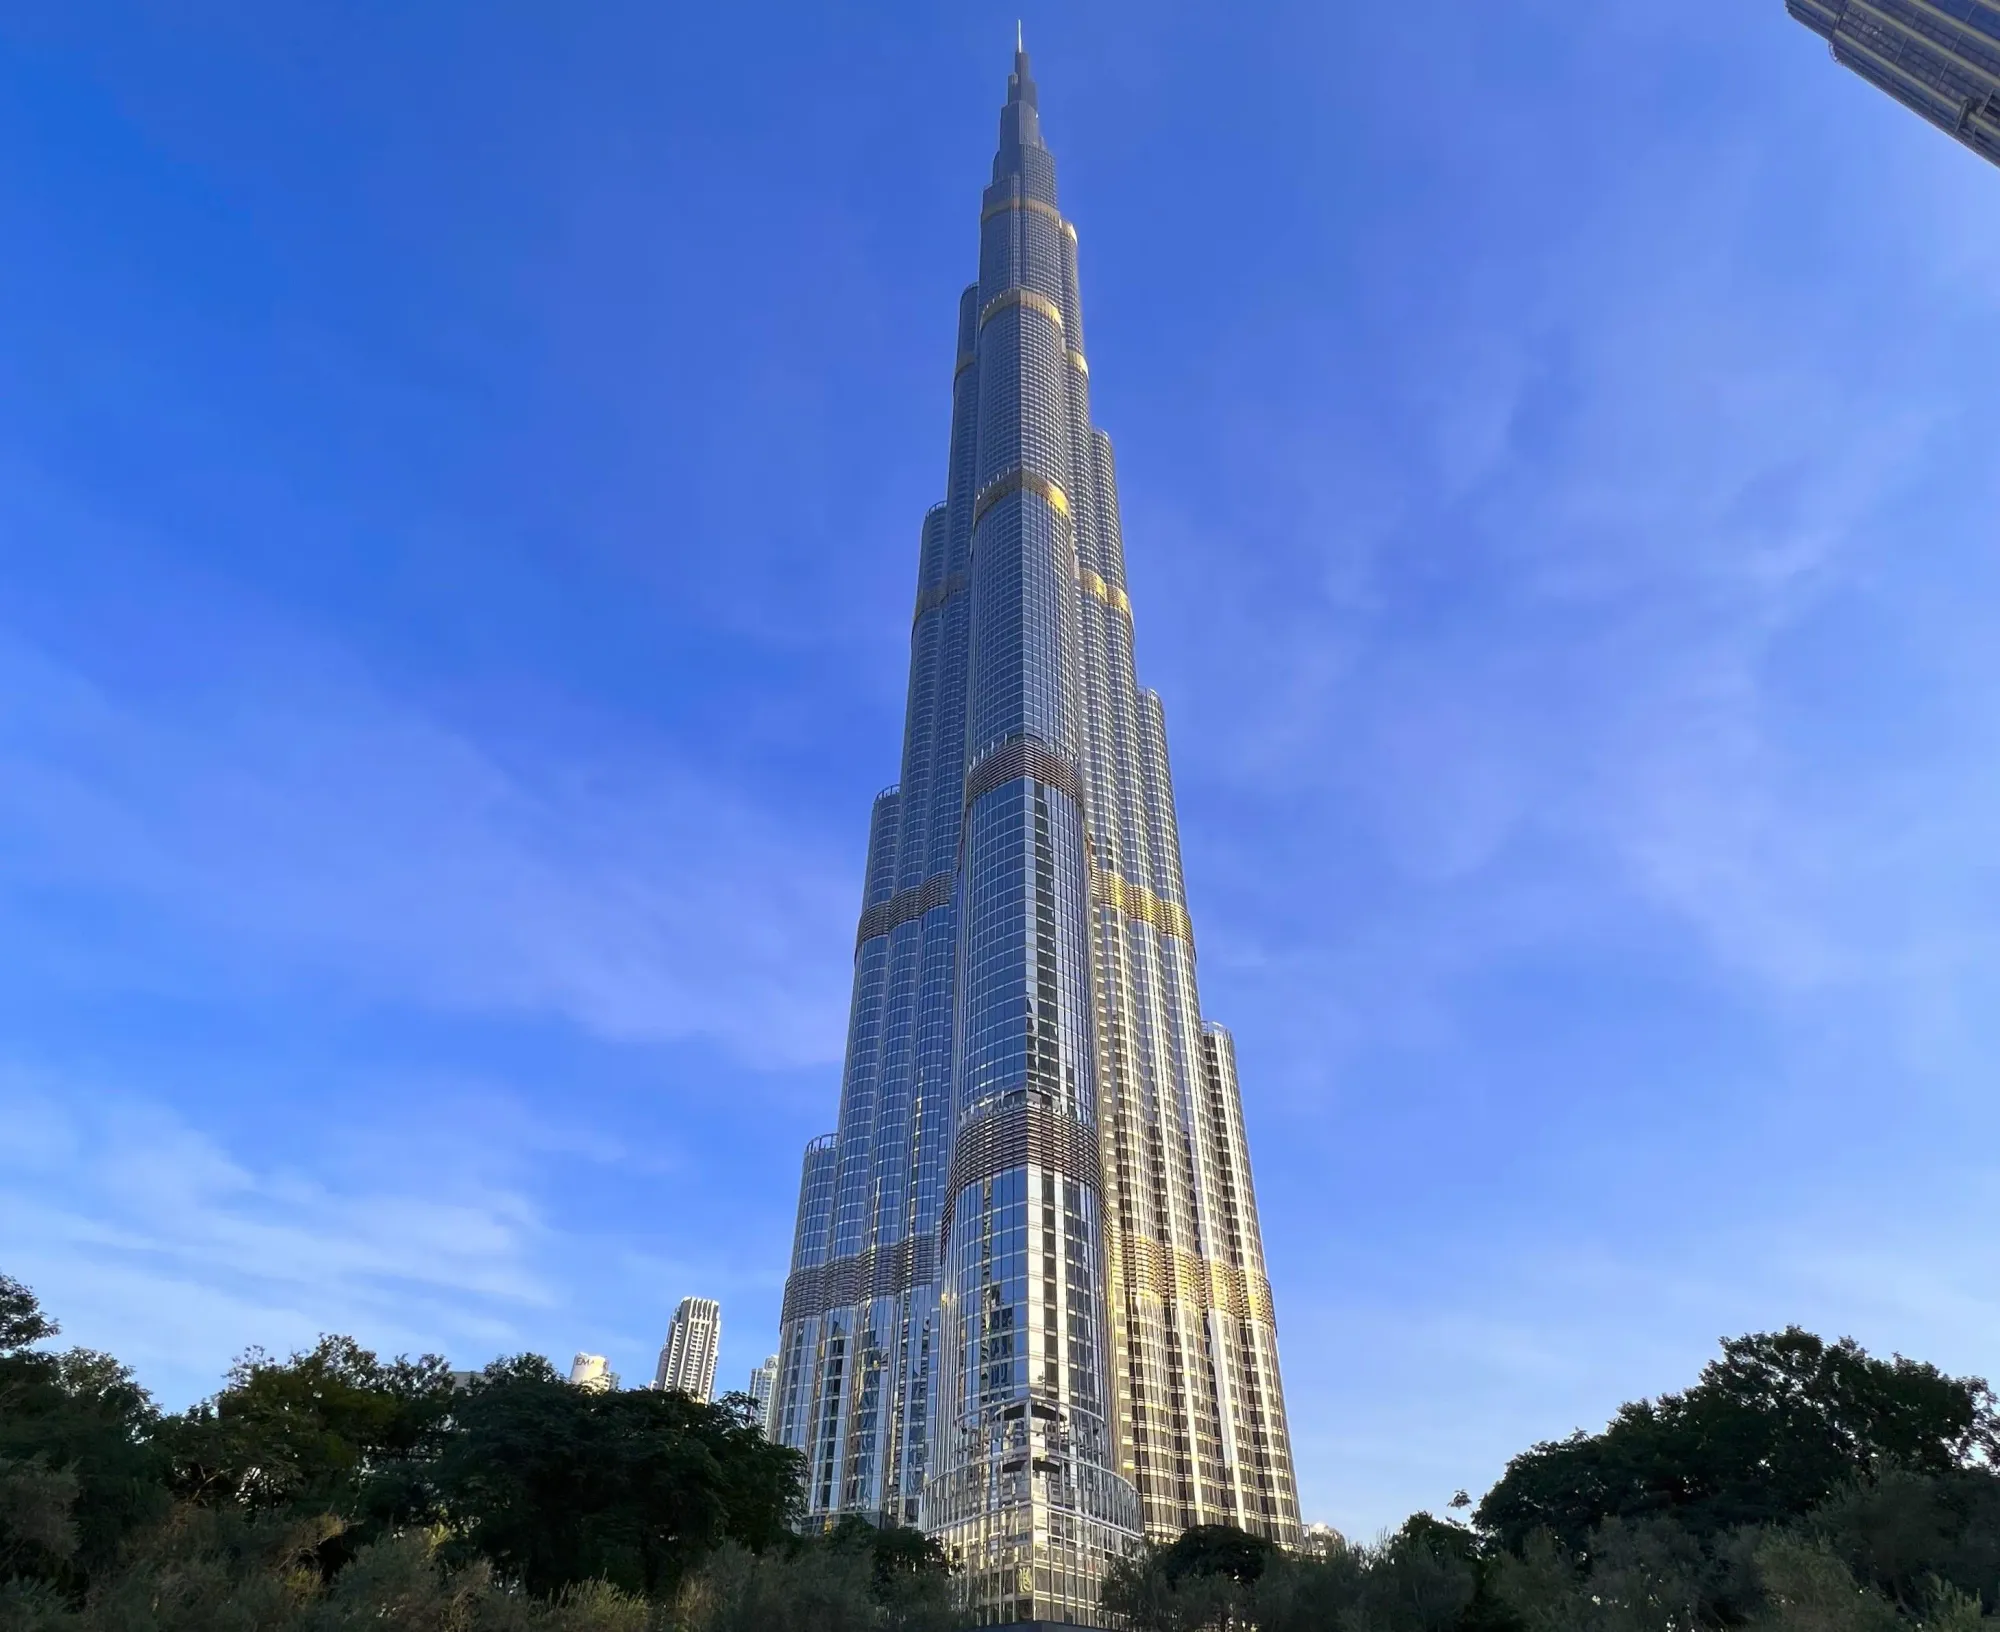 The world's tallest building with some trees at the base